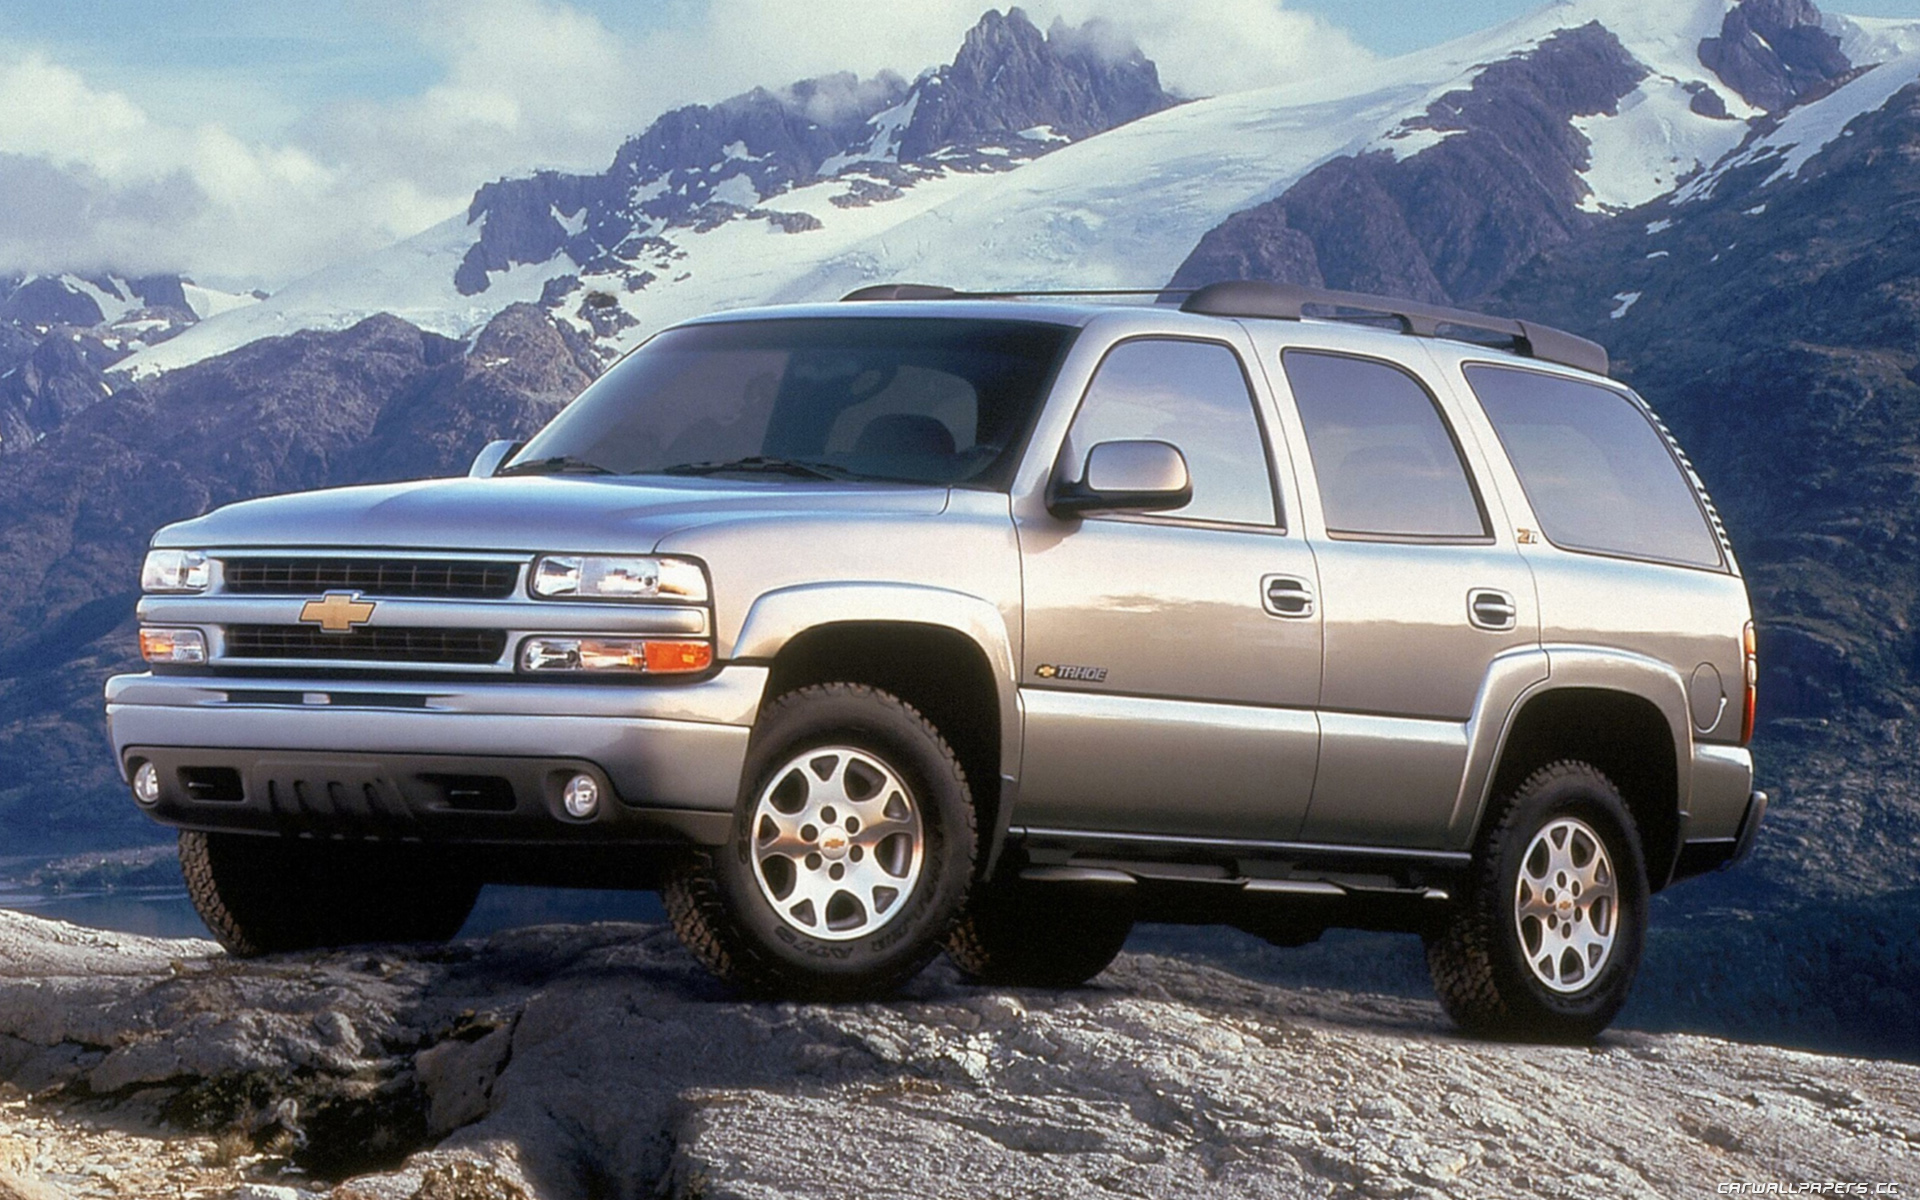 2001 Chevrolet Tahoe Information and photos MOMENTcar